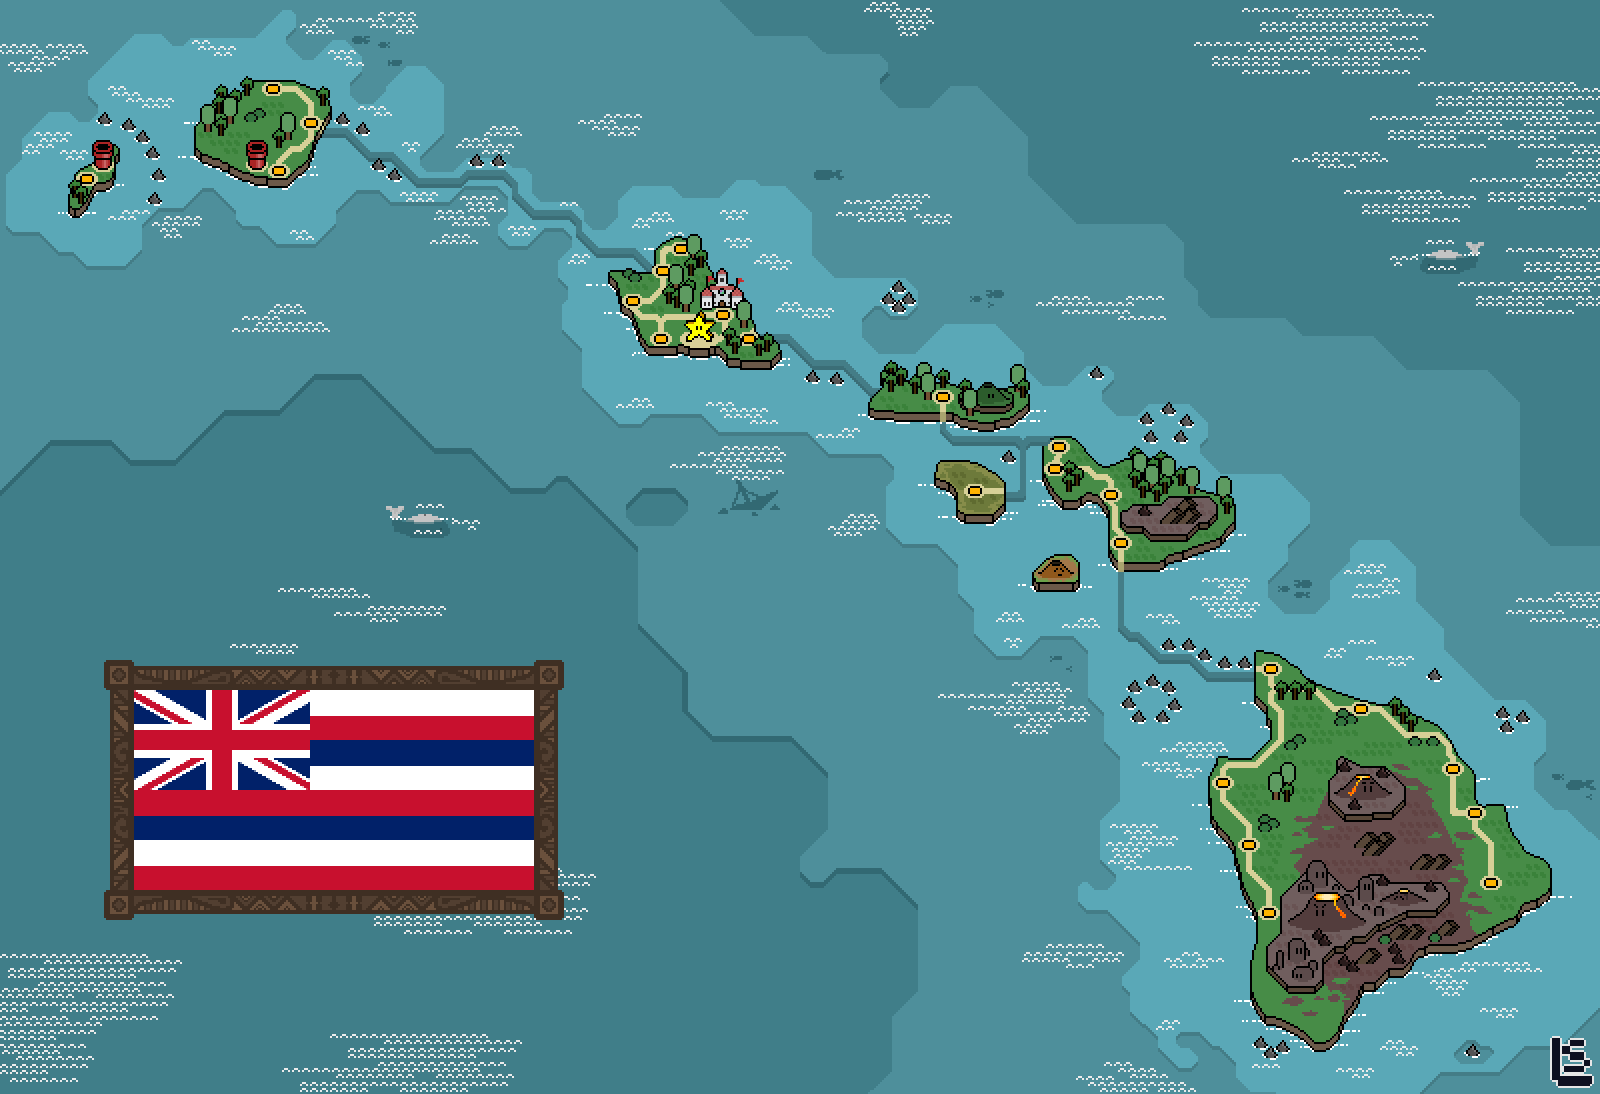 This is What Hawaii Would Look Like if it Were Part of Super Mario World